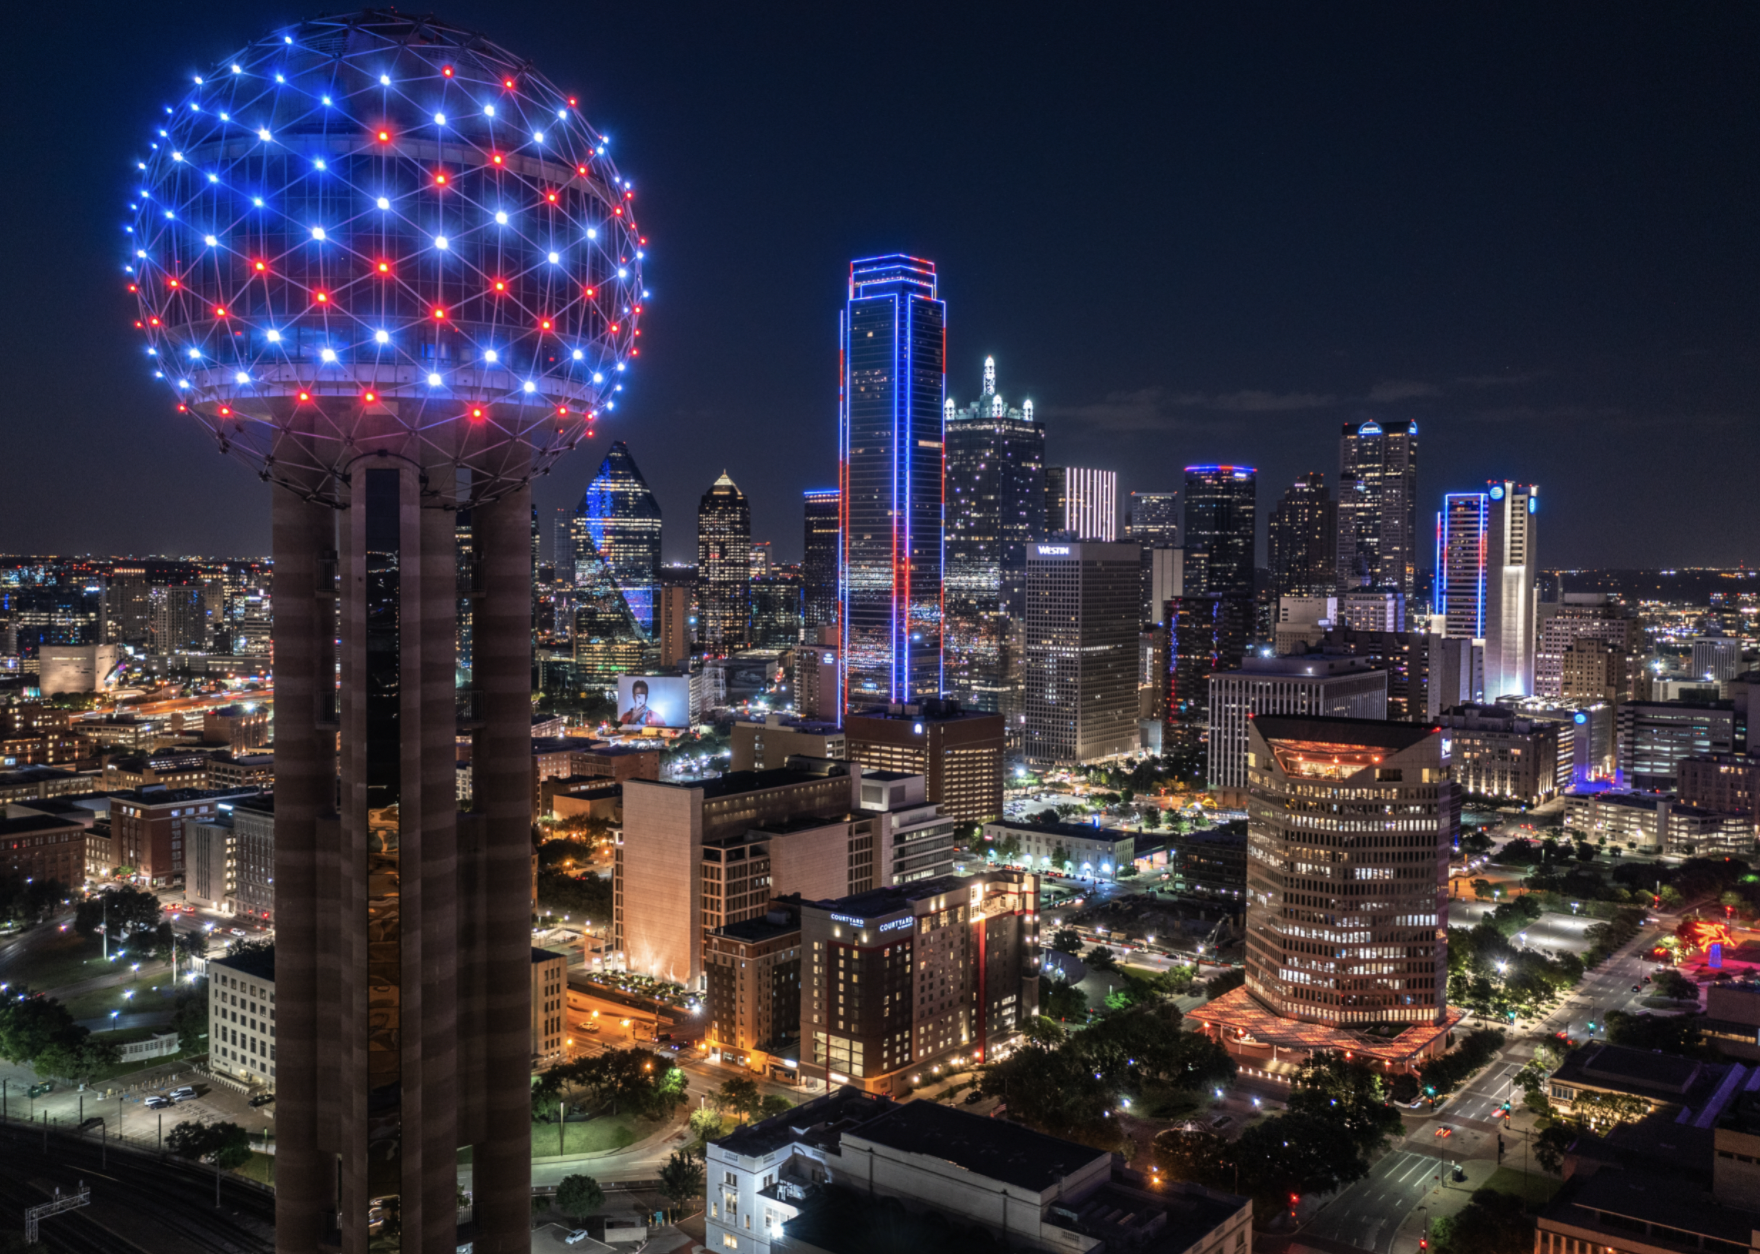 Dallas' Reunion Tower Is Getting a New Restaurant - D Magazine